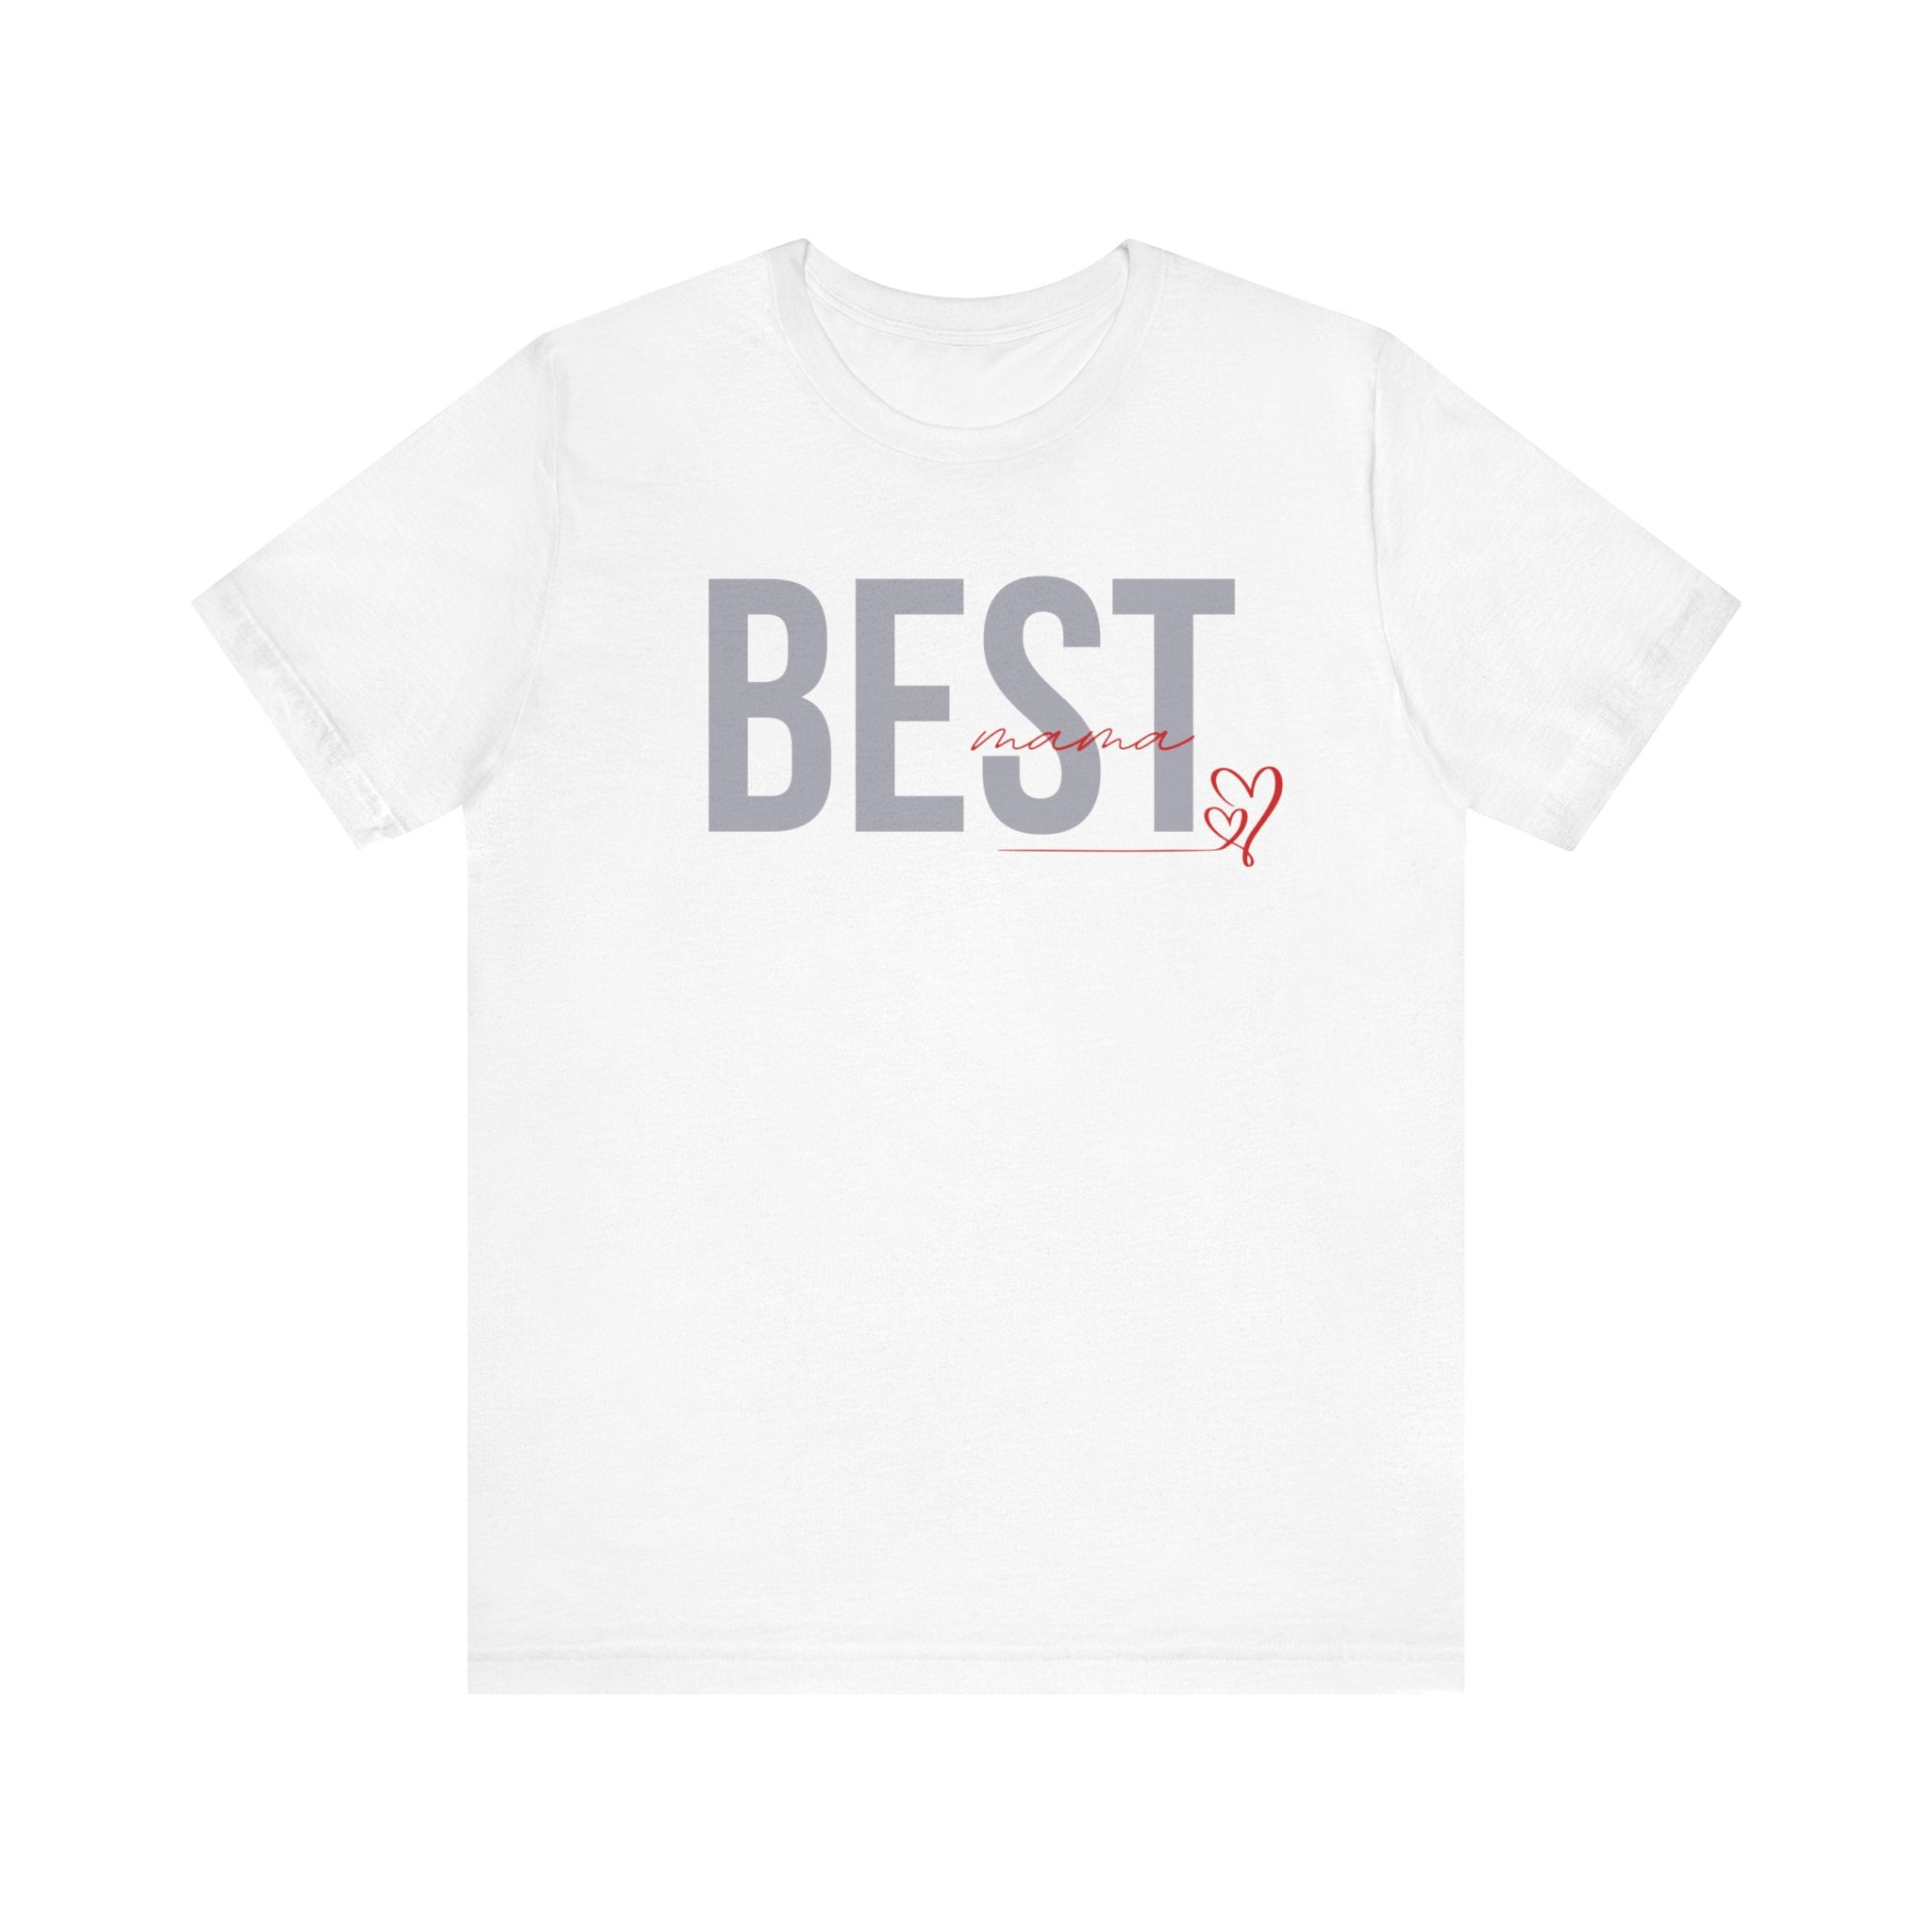 Mothers Day Gift Shirt for Women, Best Mama T-shirt, Minimalist Shirt Gift for Her, New Mom Gifts